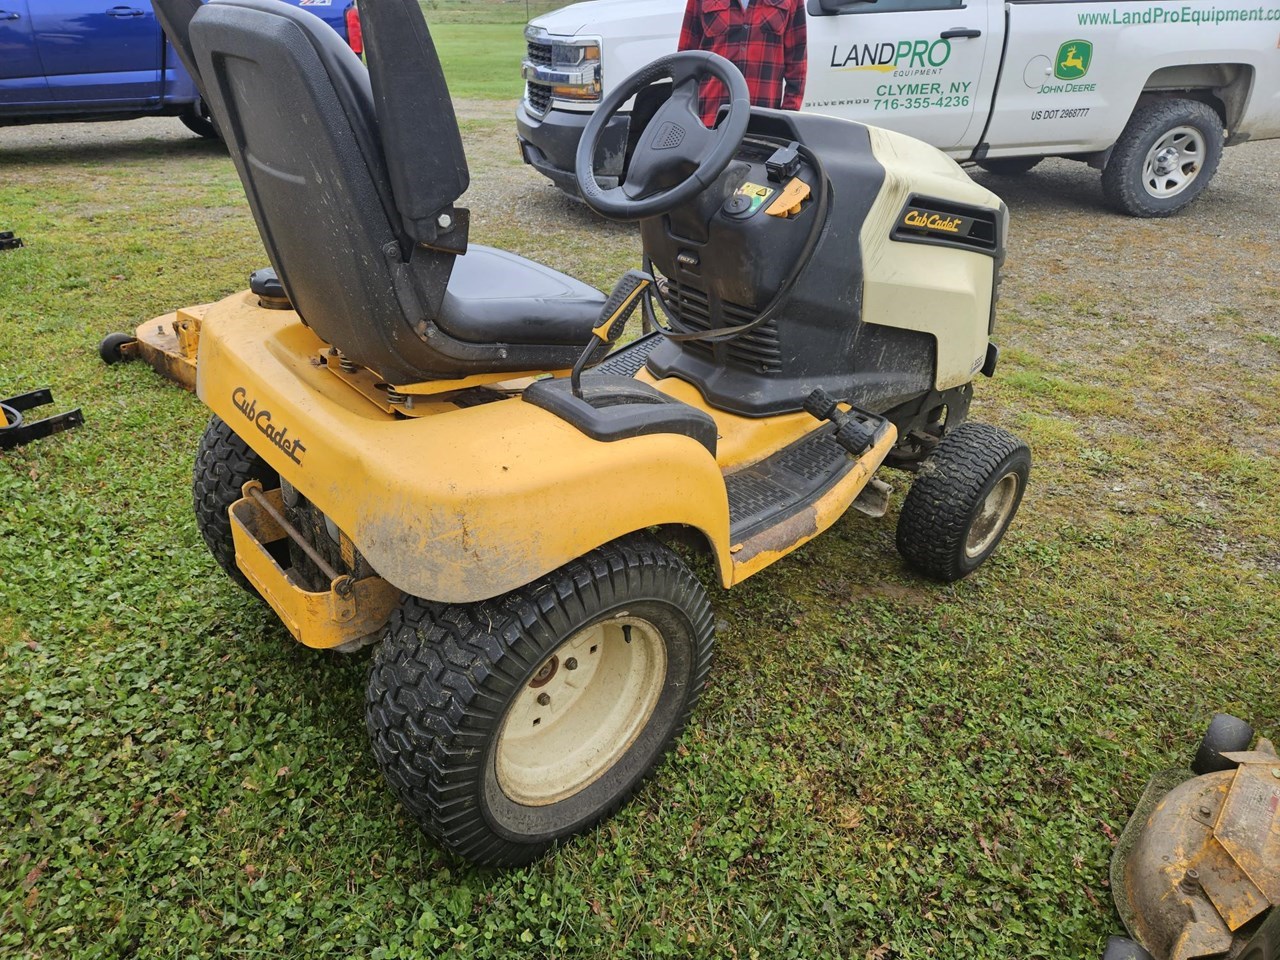 2011 Cub Cadet GT2000 Riding Mower For Sale in Clymer New York